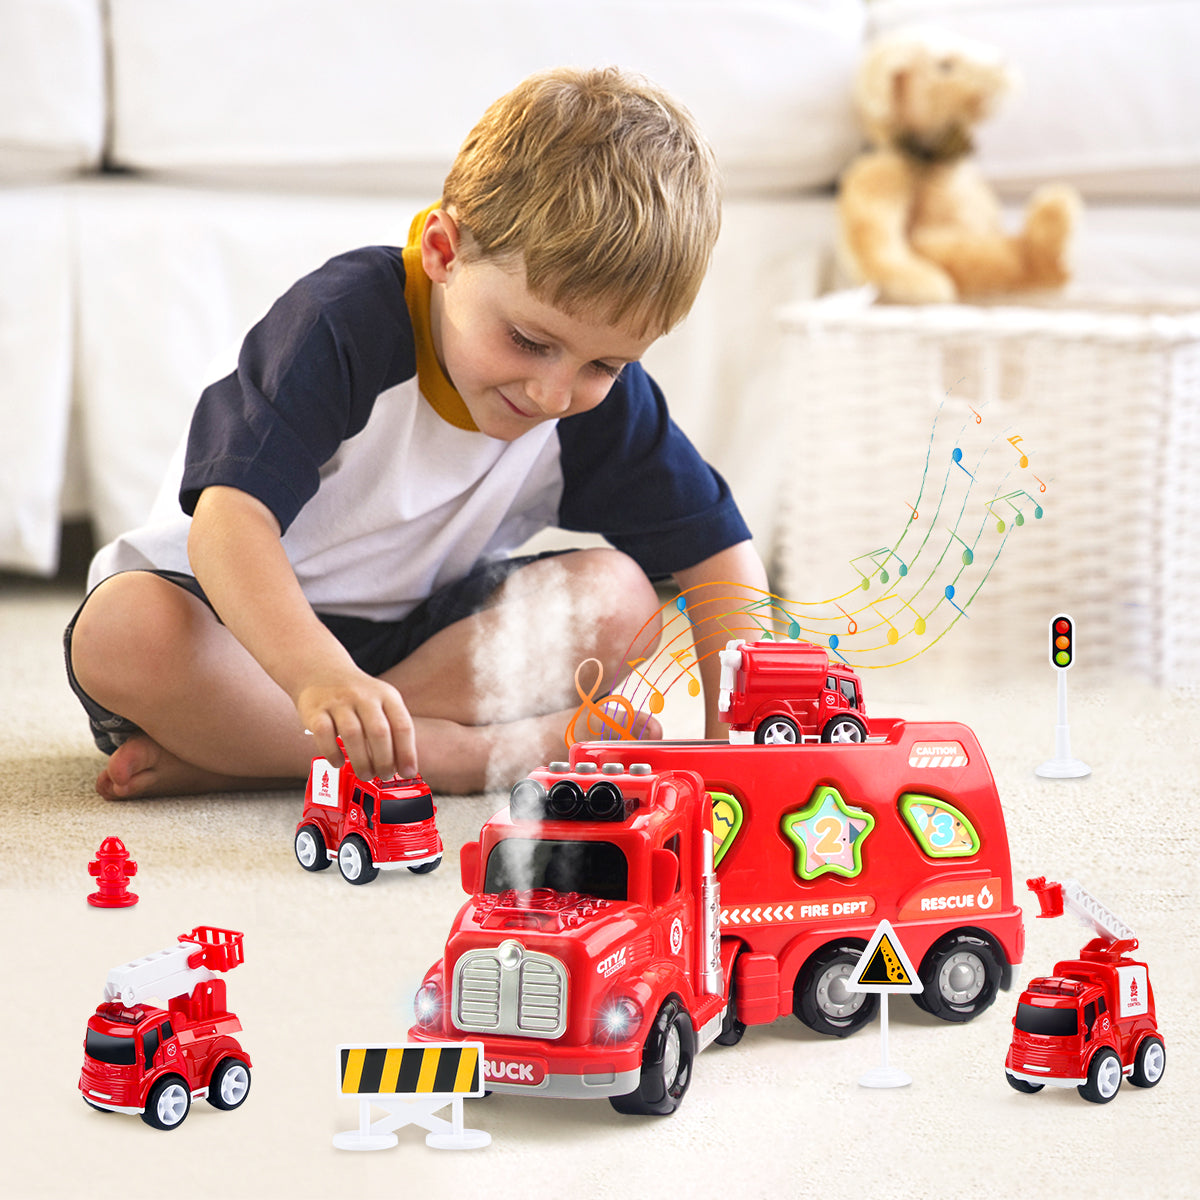 Joyfia Fire Truck Toys for 3-8 Year Old Boys, 5 in 1 Transport Truck Carrier Toy with Light and Sound & Vapor Spray, Mini Fire Rescue Truck Toy, Christmas Birthday Gifts for Kids